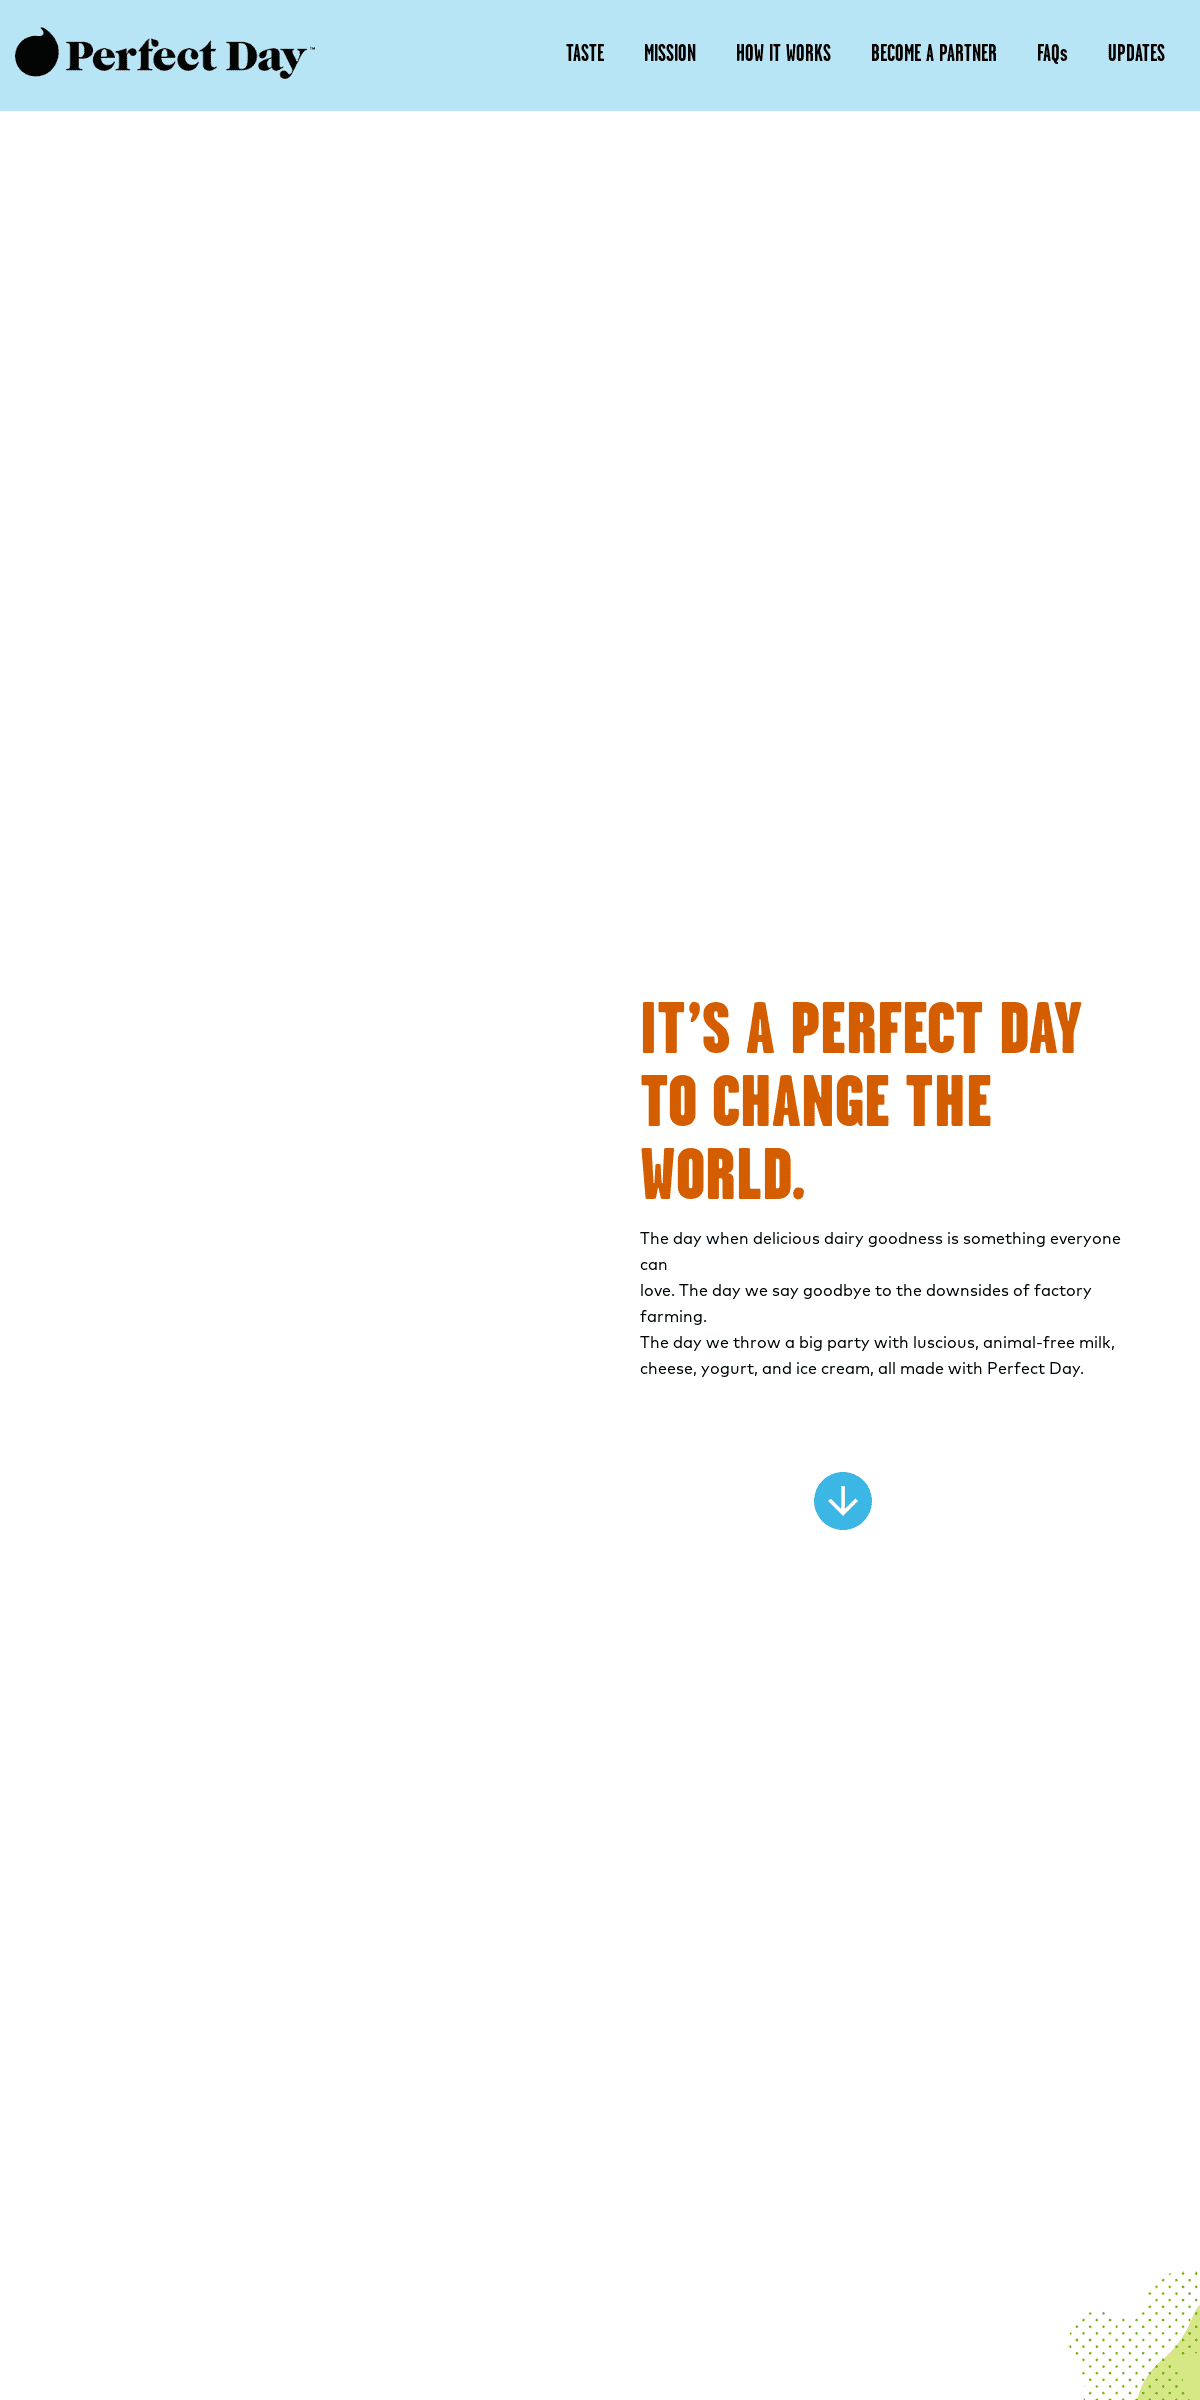 A complete backup of perfectdayfoods.com